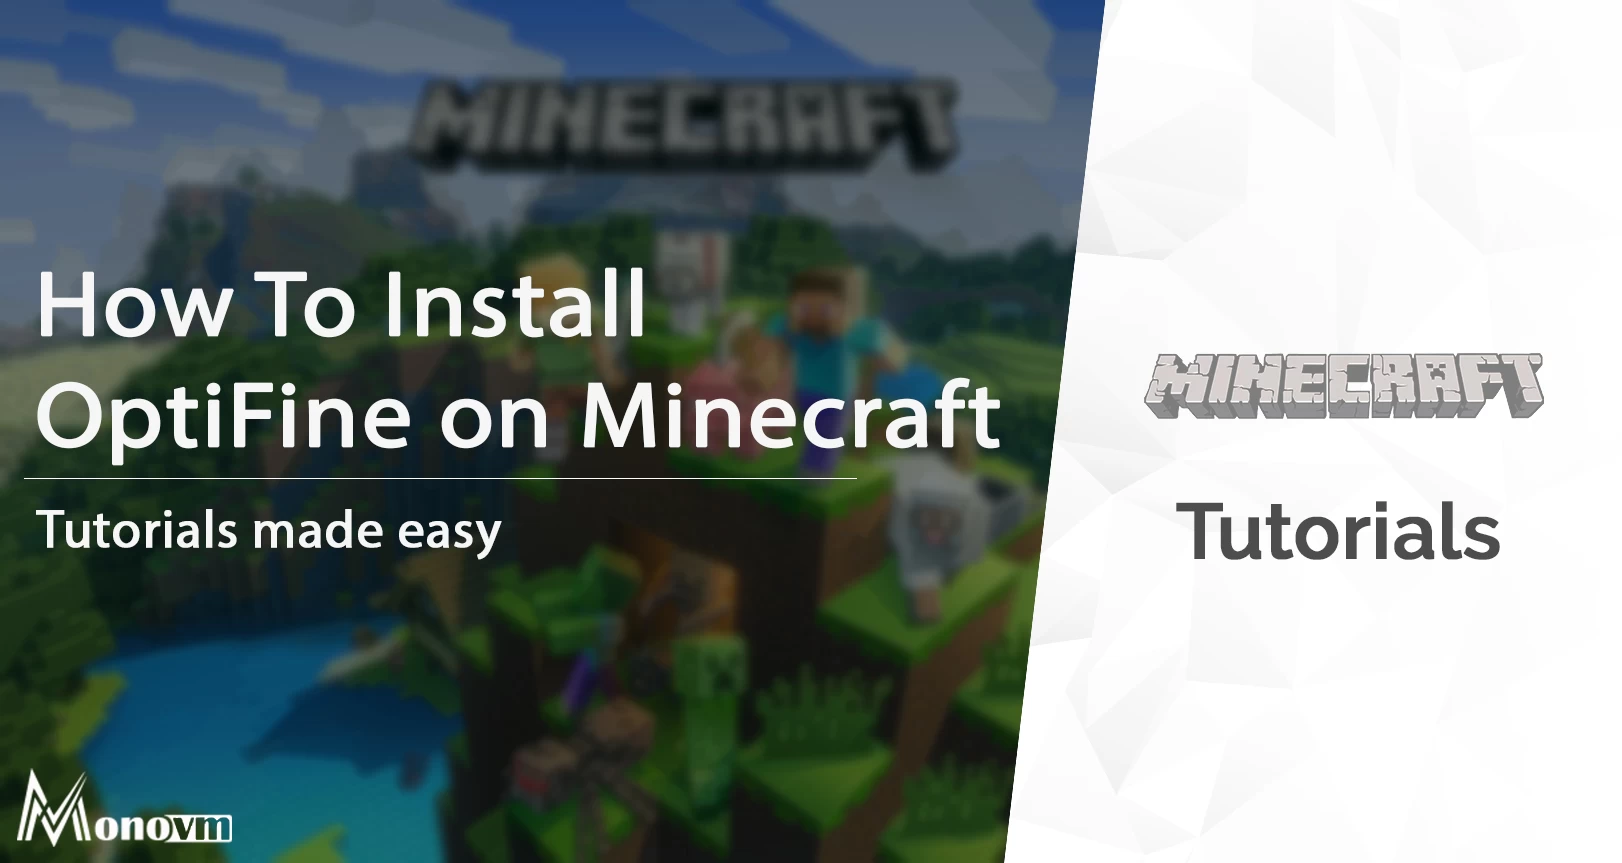 How To Install OptiFine on Minecraft